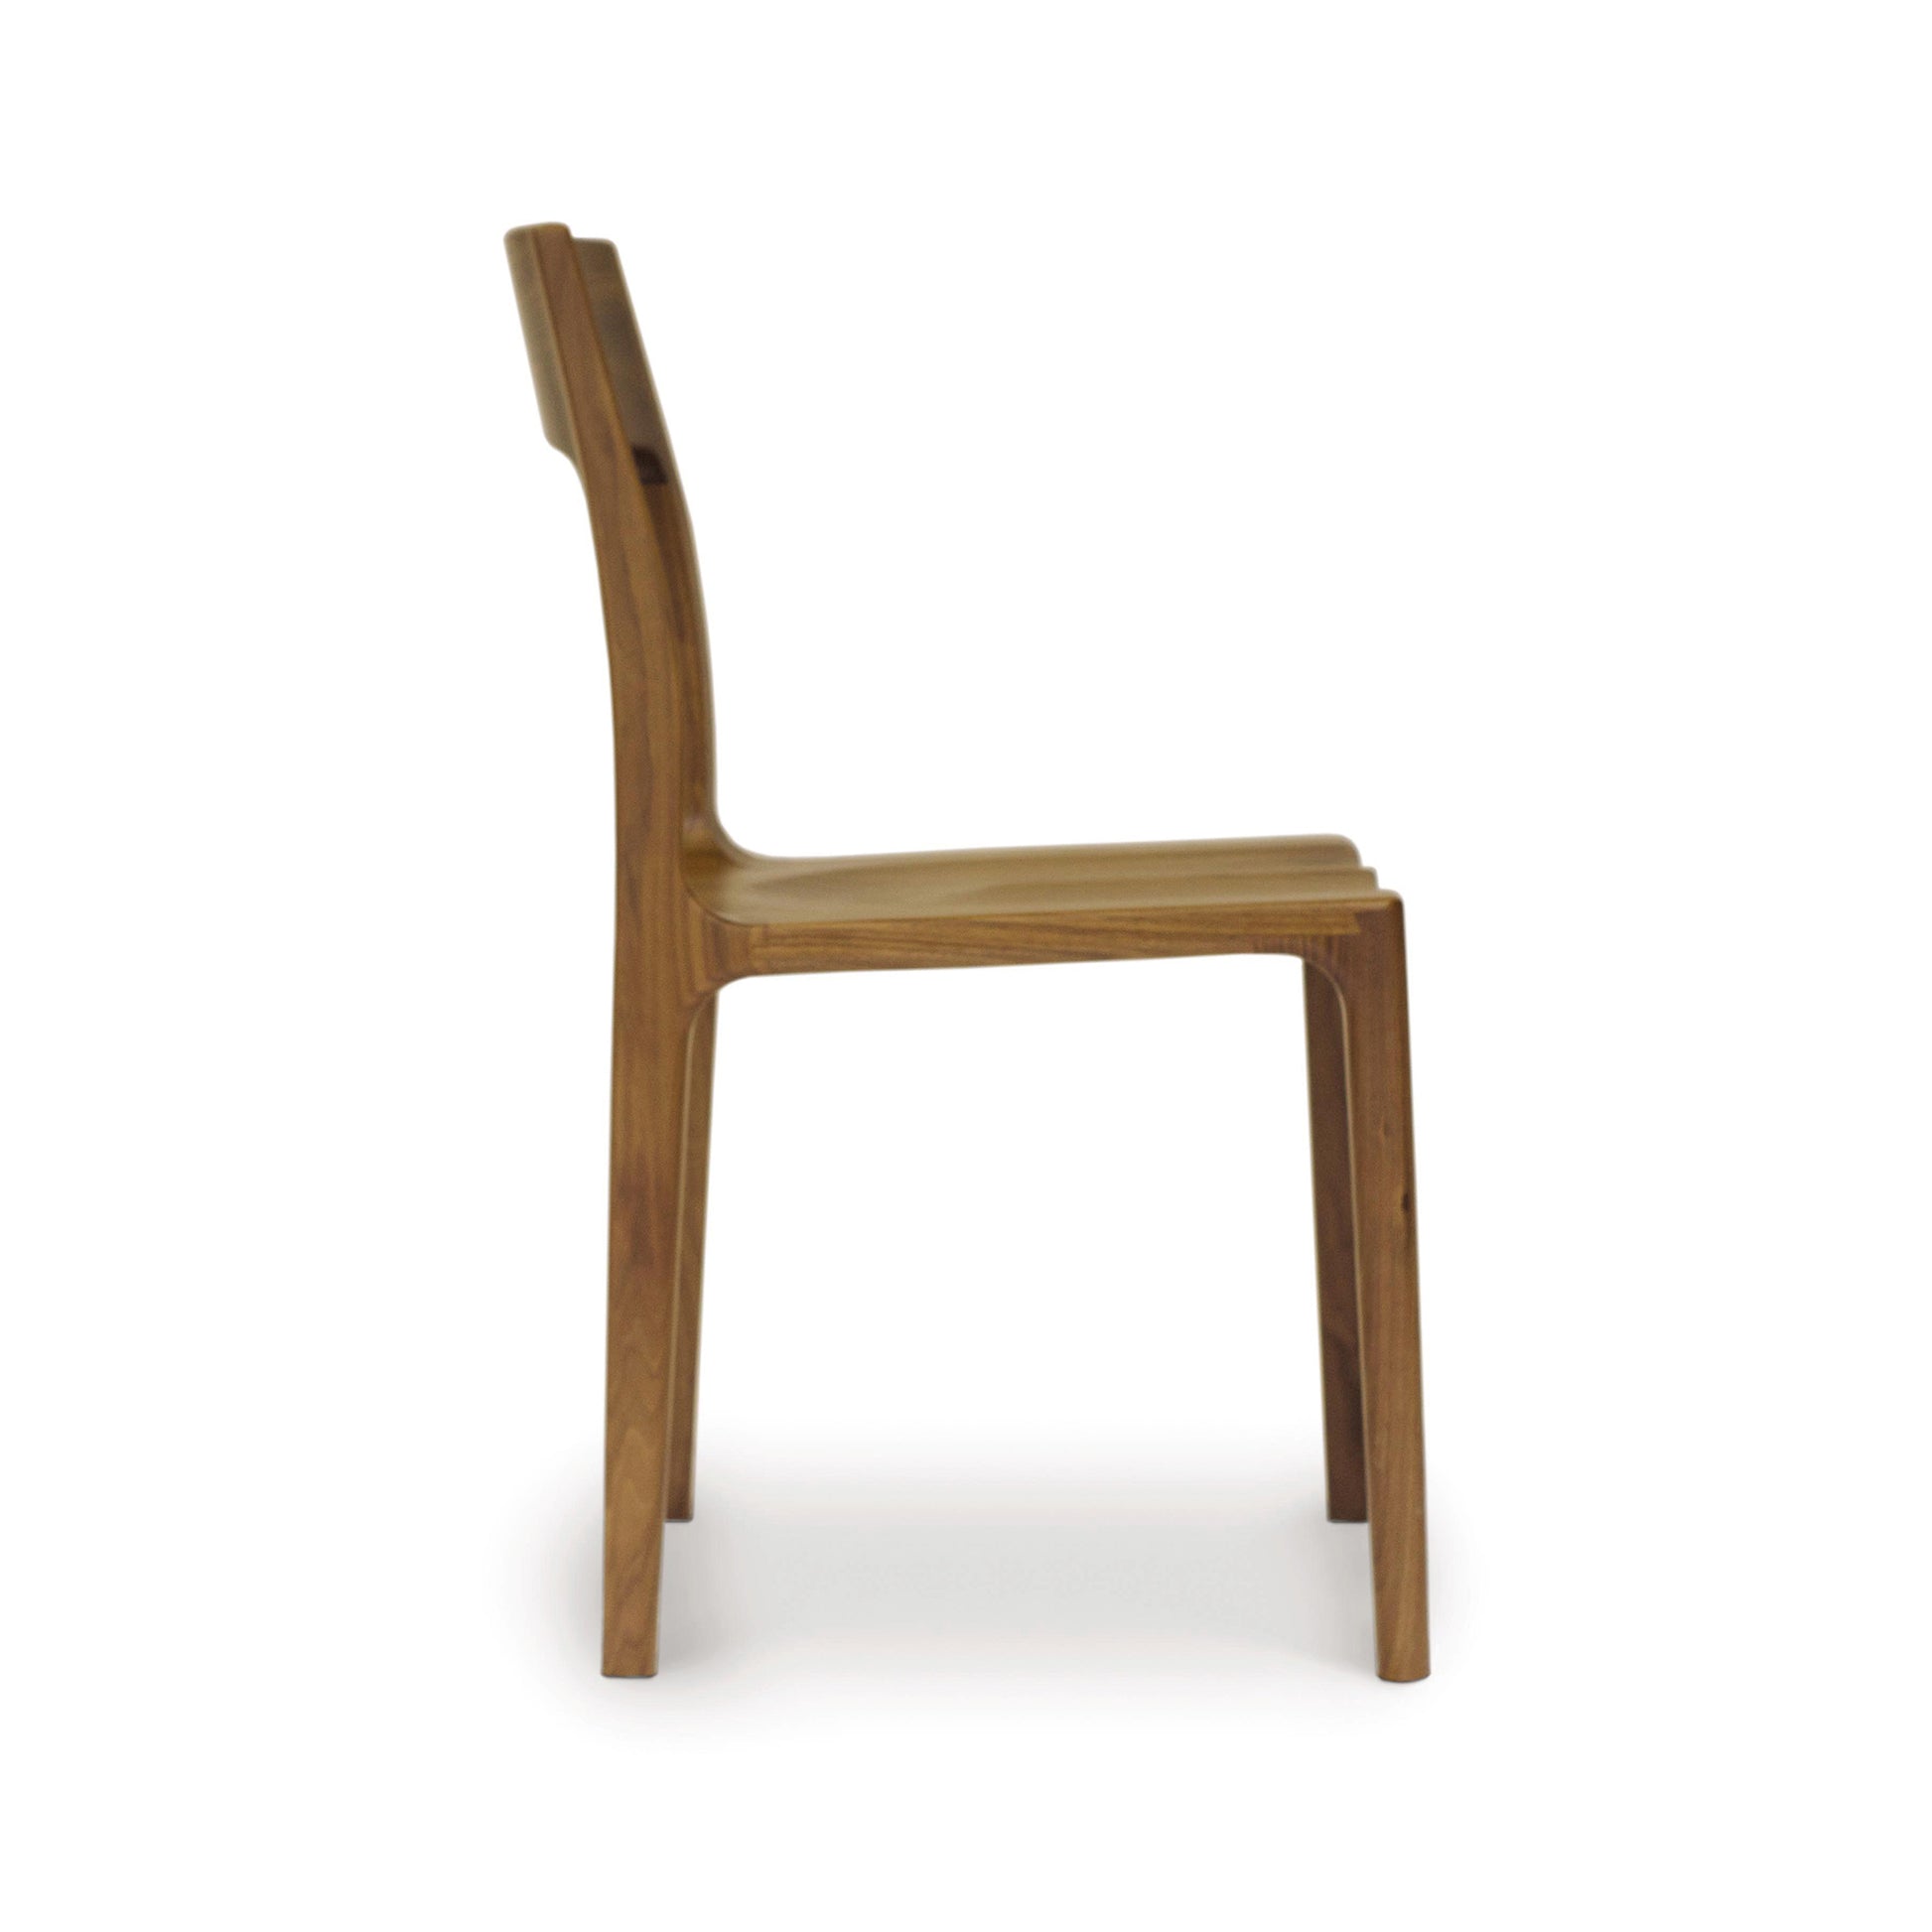 A walnut Lisse Dining Chair from the Copeland Furniture Collection, with a curved backrest and seat, isolated on a white background.